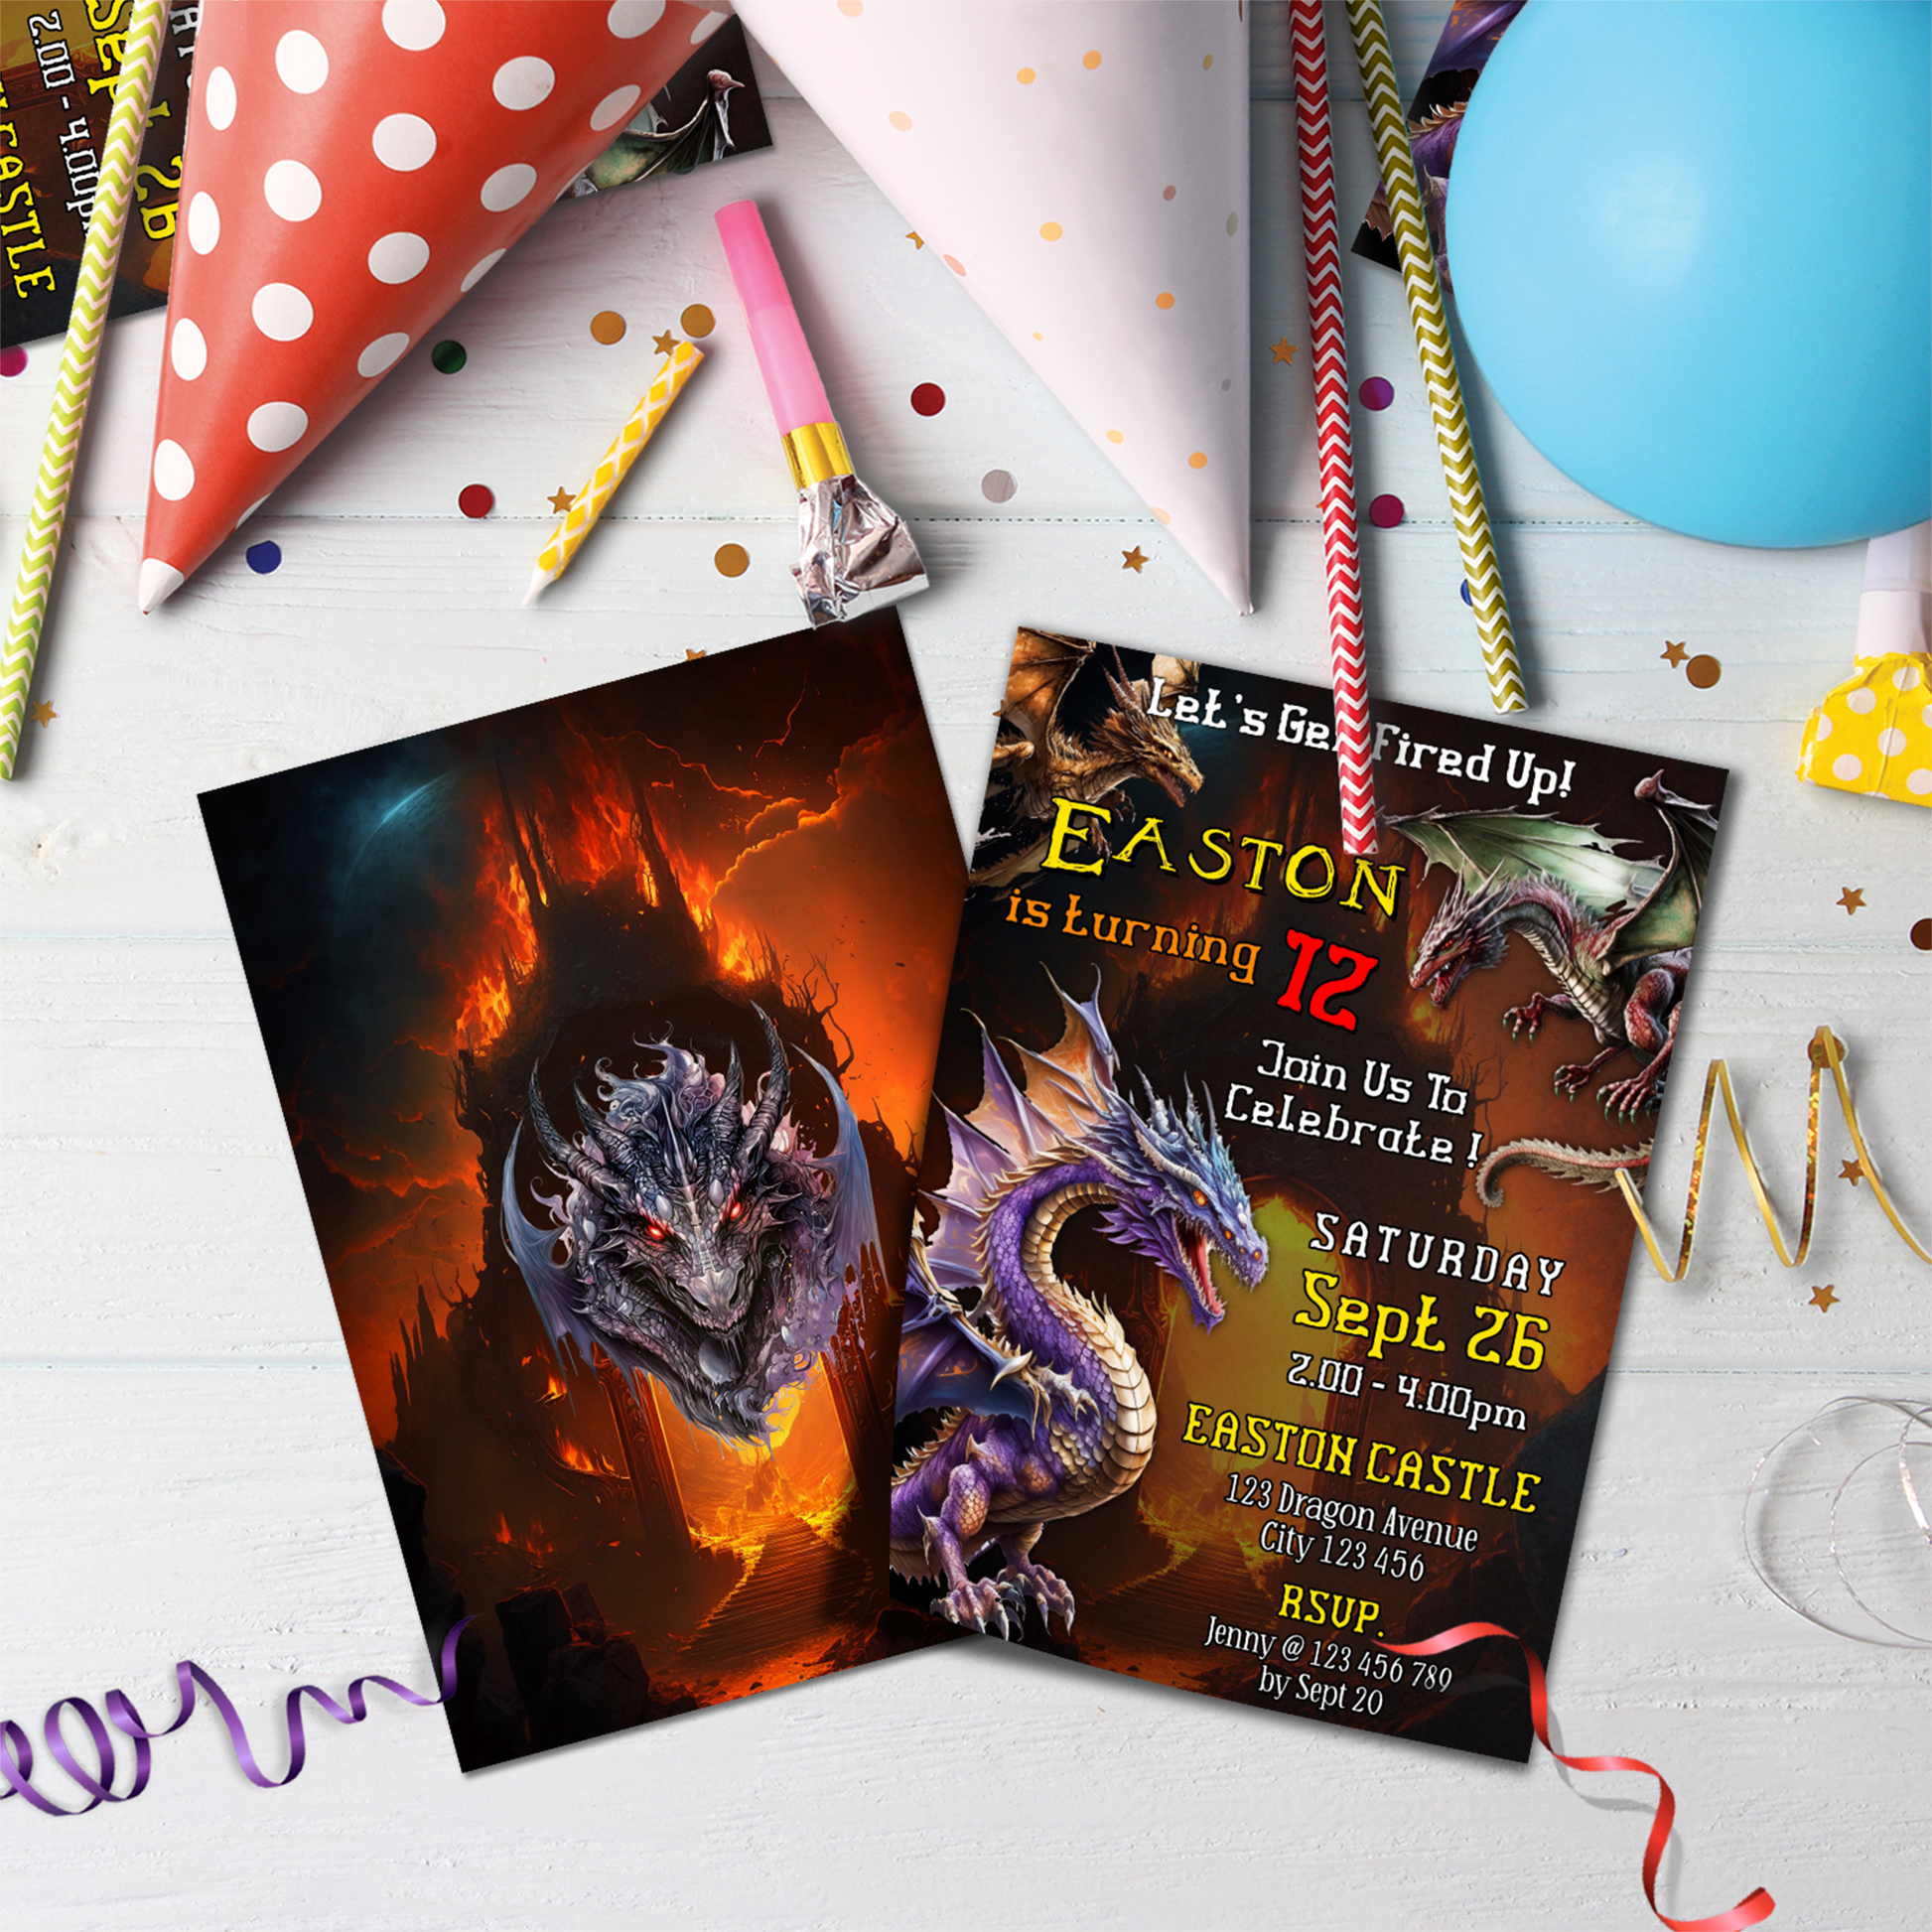 Personalized birthday card invitations with a Dragon theme